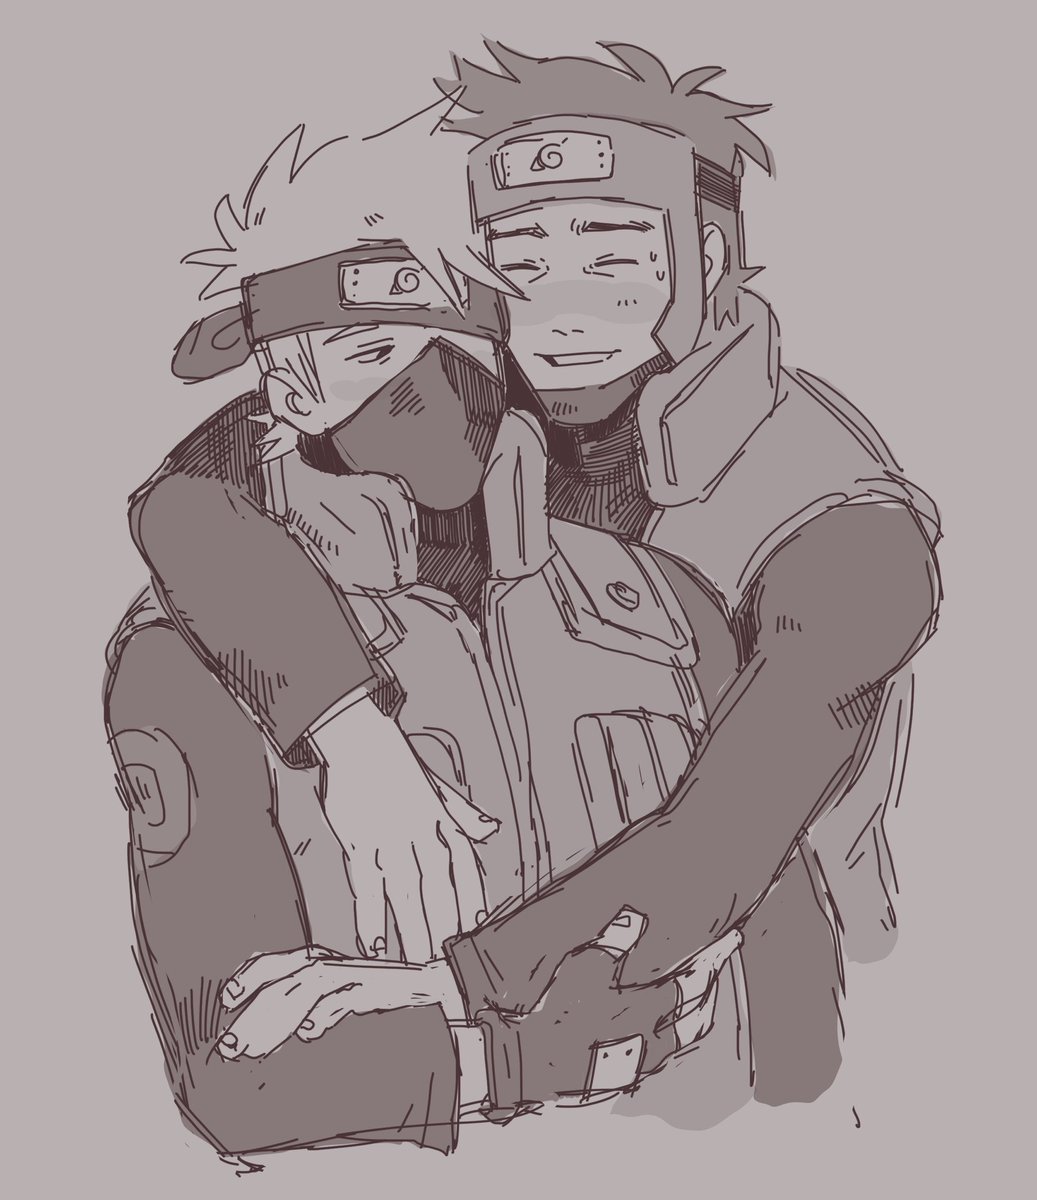 @bothpalms @feastevil i was informed to draw kakashi and yamato for both of u so here is my attempt ... im sorry i know nothing about naruto 😔